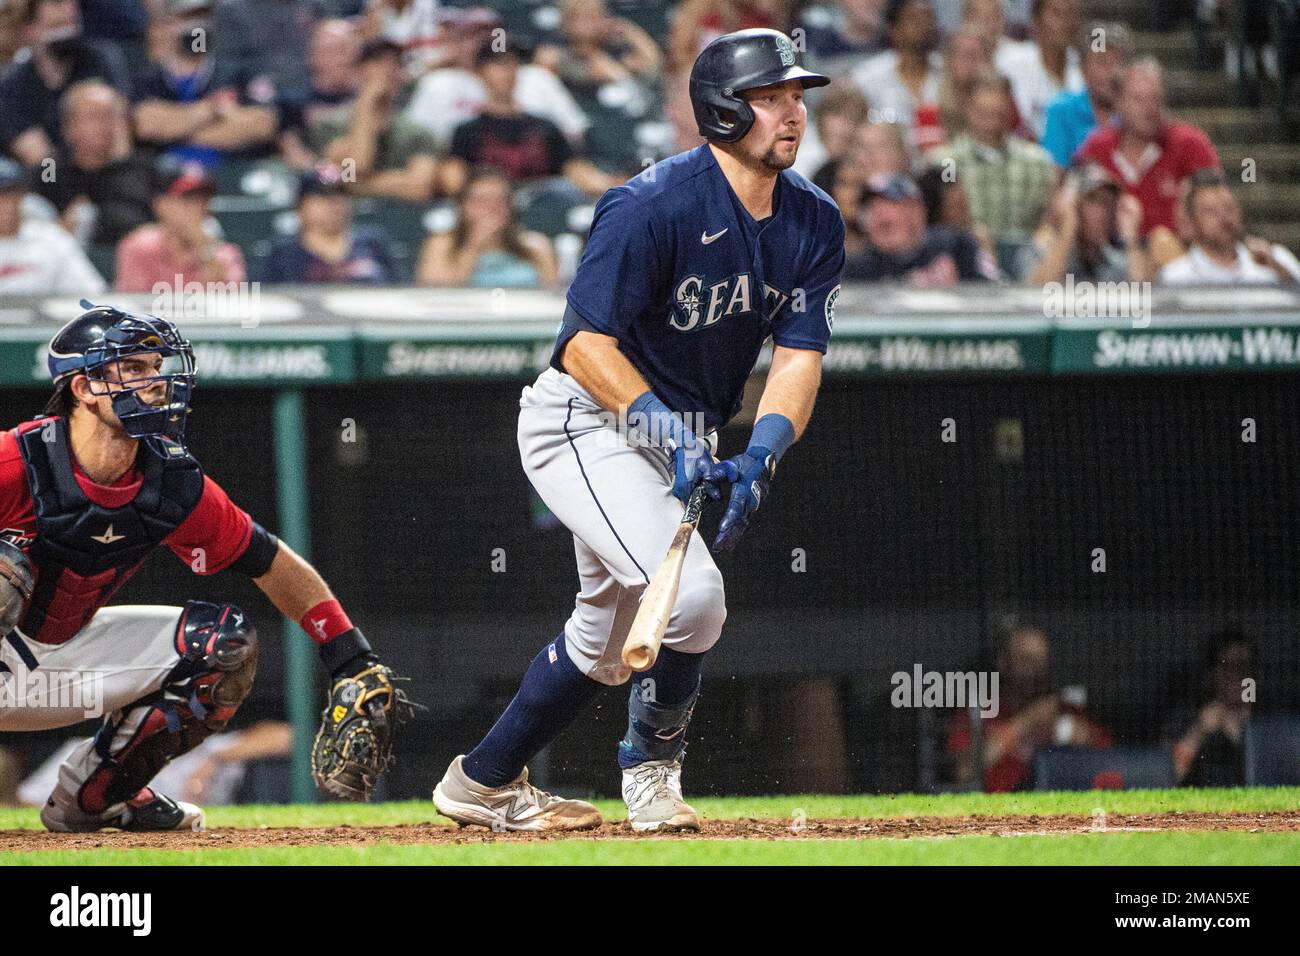 Seattle Mariners' J.P. Crawford runs to first on his RBI single against the  Oakland Athletics during the fourth inning of a baseball game Wednesday,  May 24, 2023, in Seattle. (AP Photo/John Froschauer